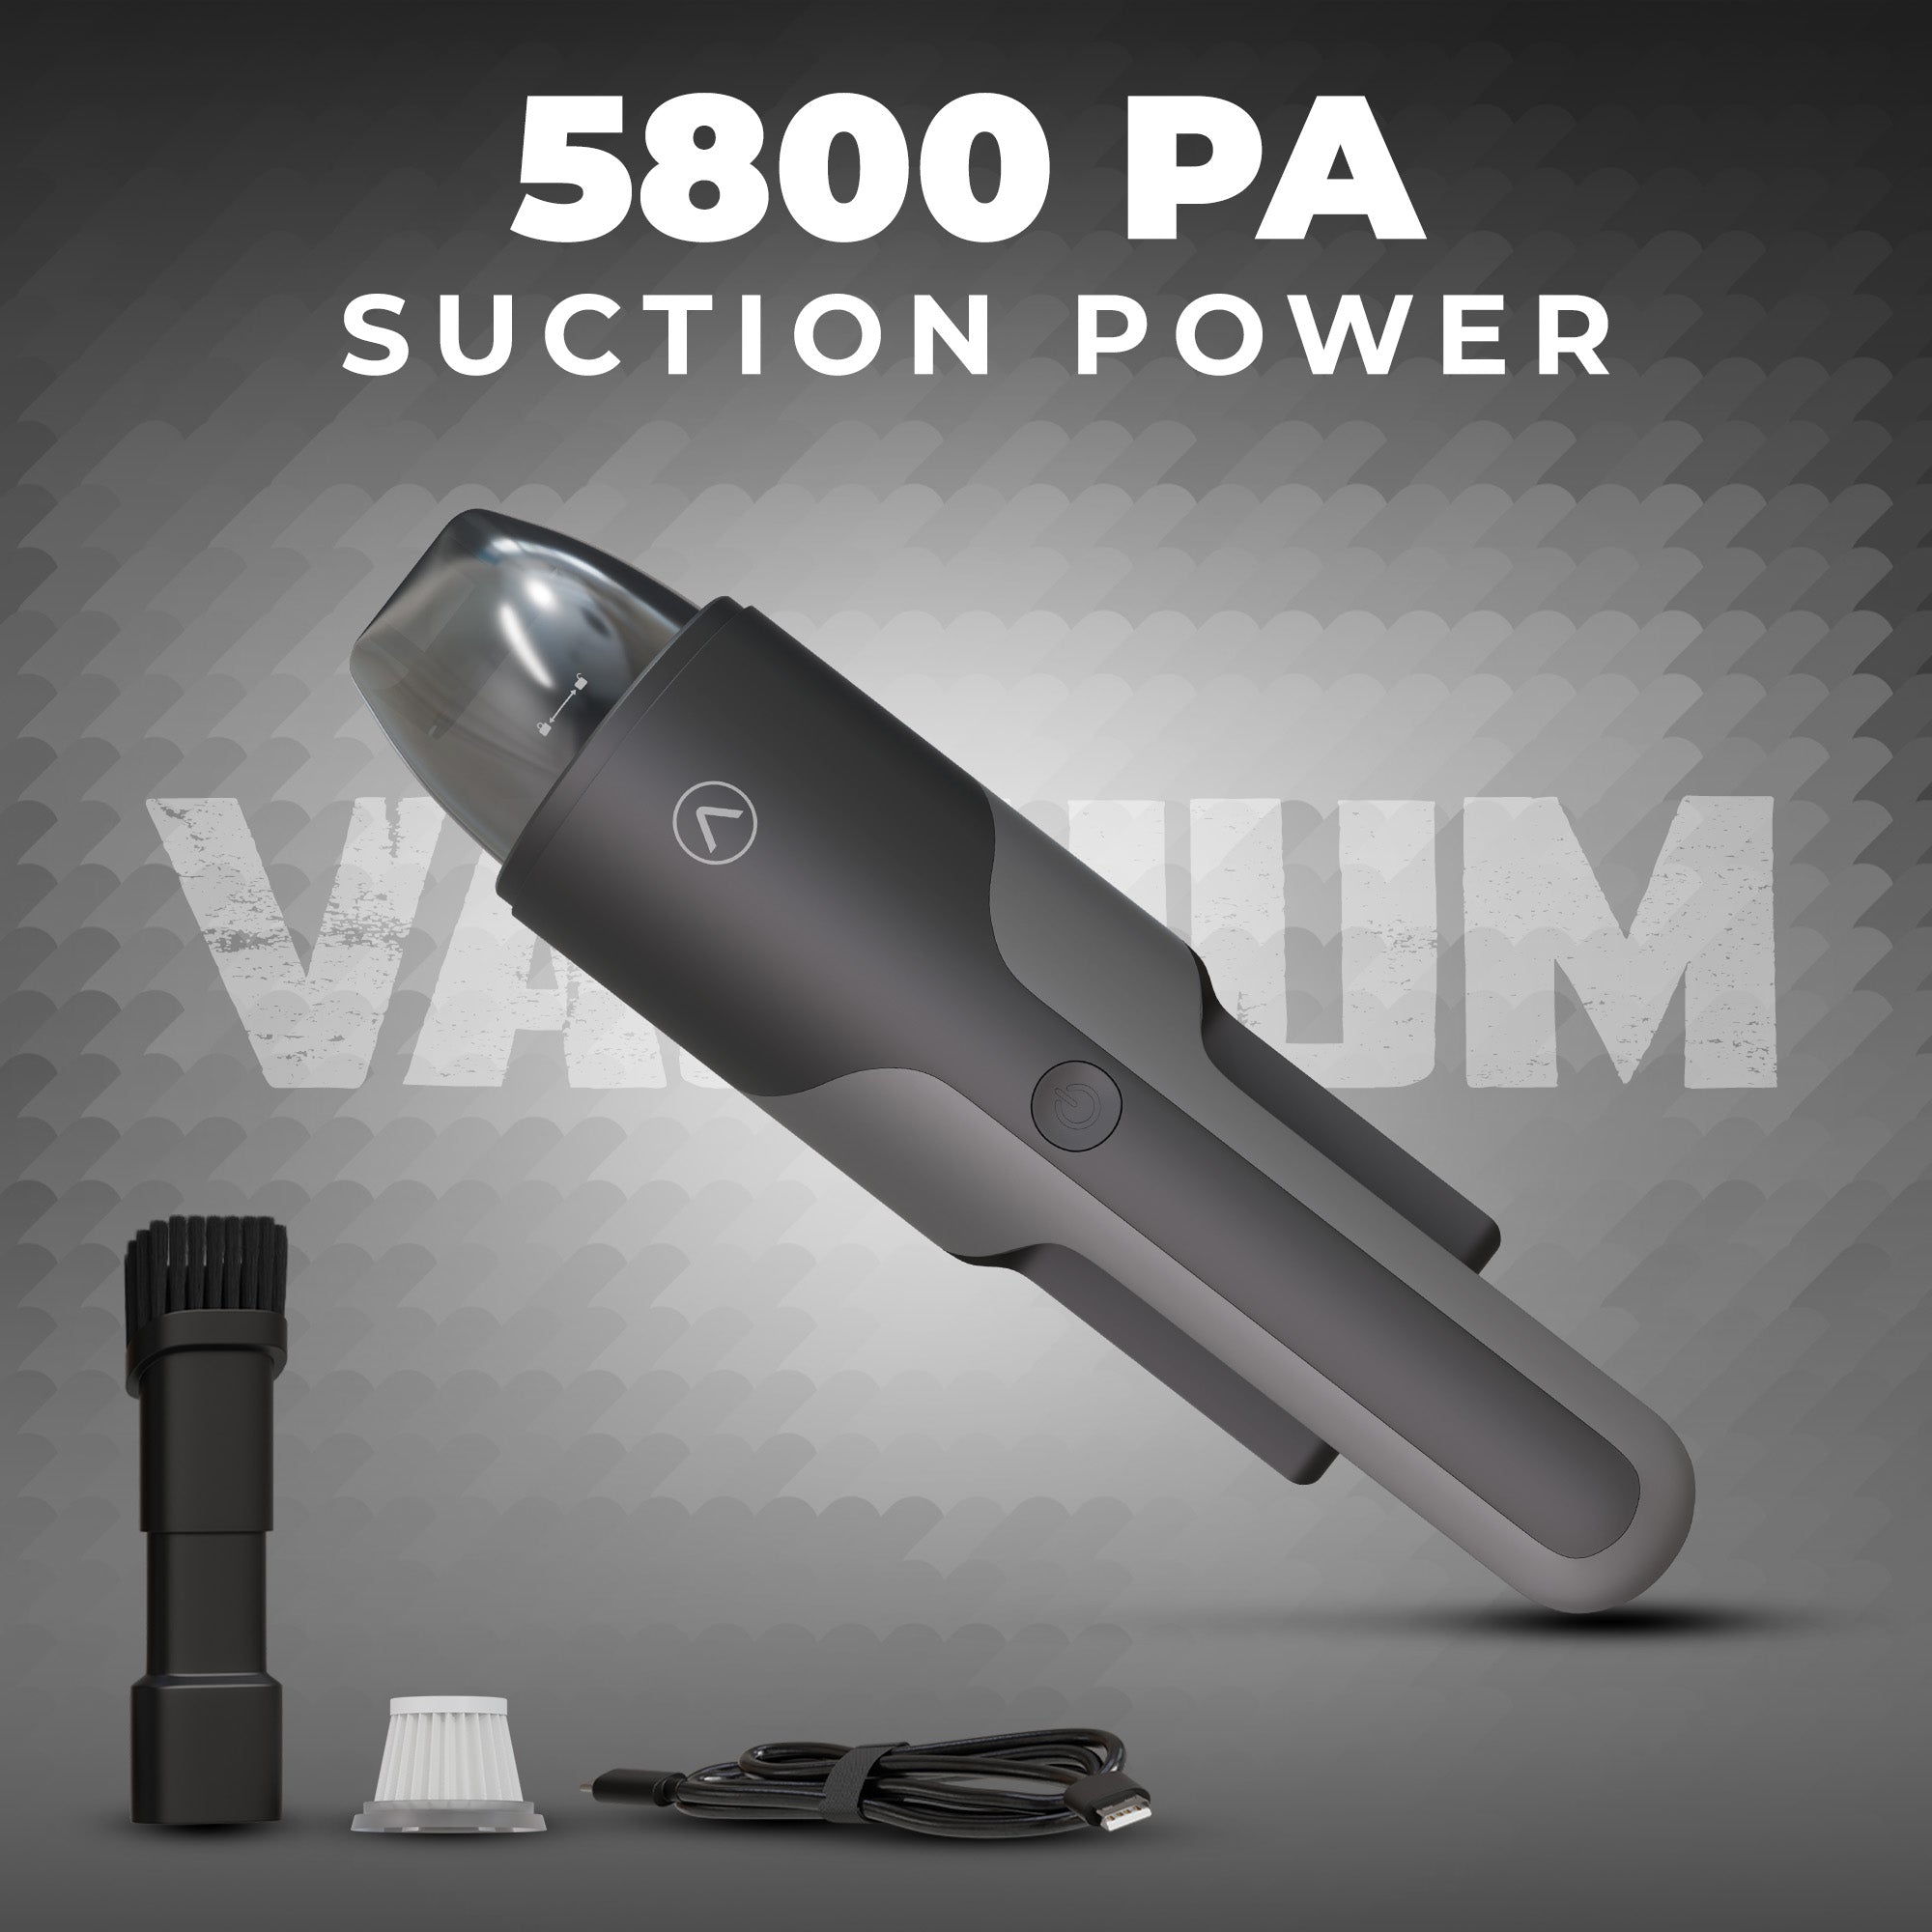 Vacuair V3 Portable & Cordless Vacuum Cleaner with 5800 Pa Suction Power | 5000 mAh Battery